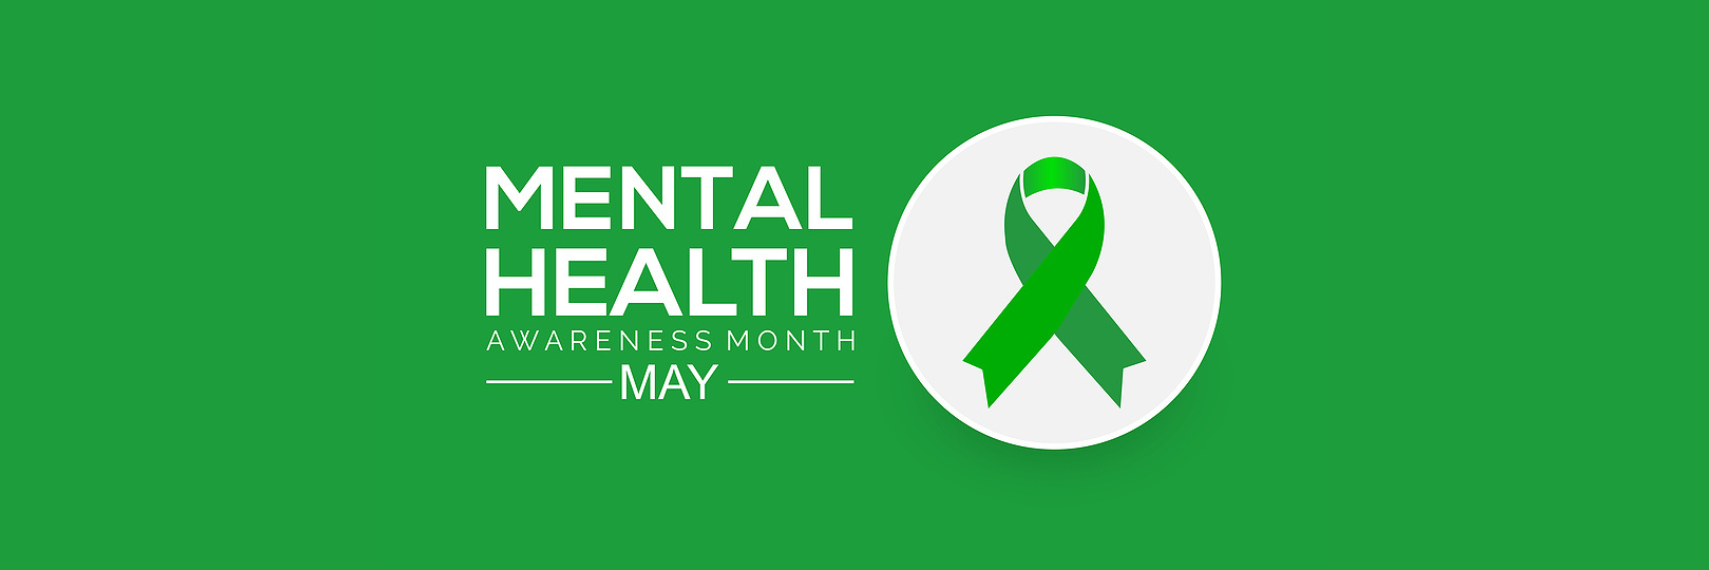 May is Mental Health Awareness Month. Green and white graphic with a green awareness ribbon.